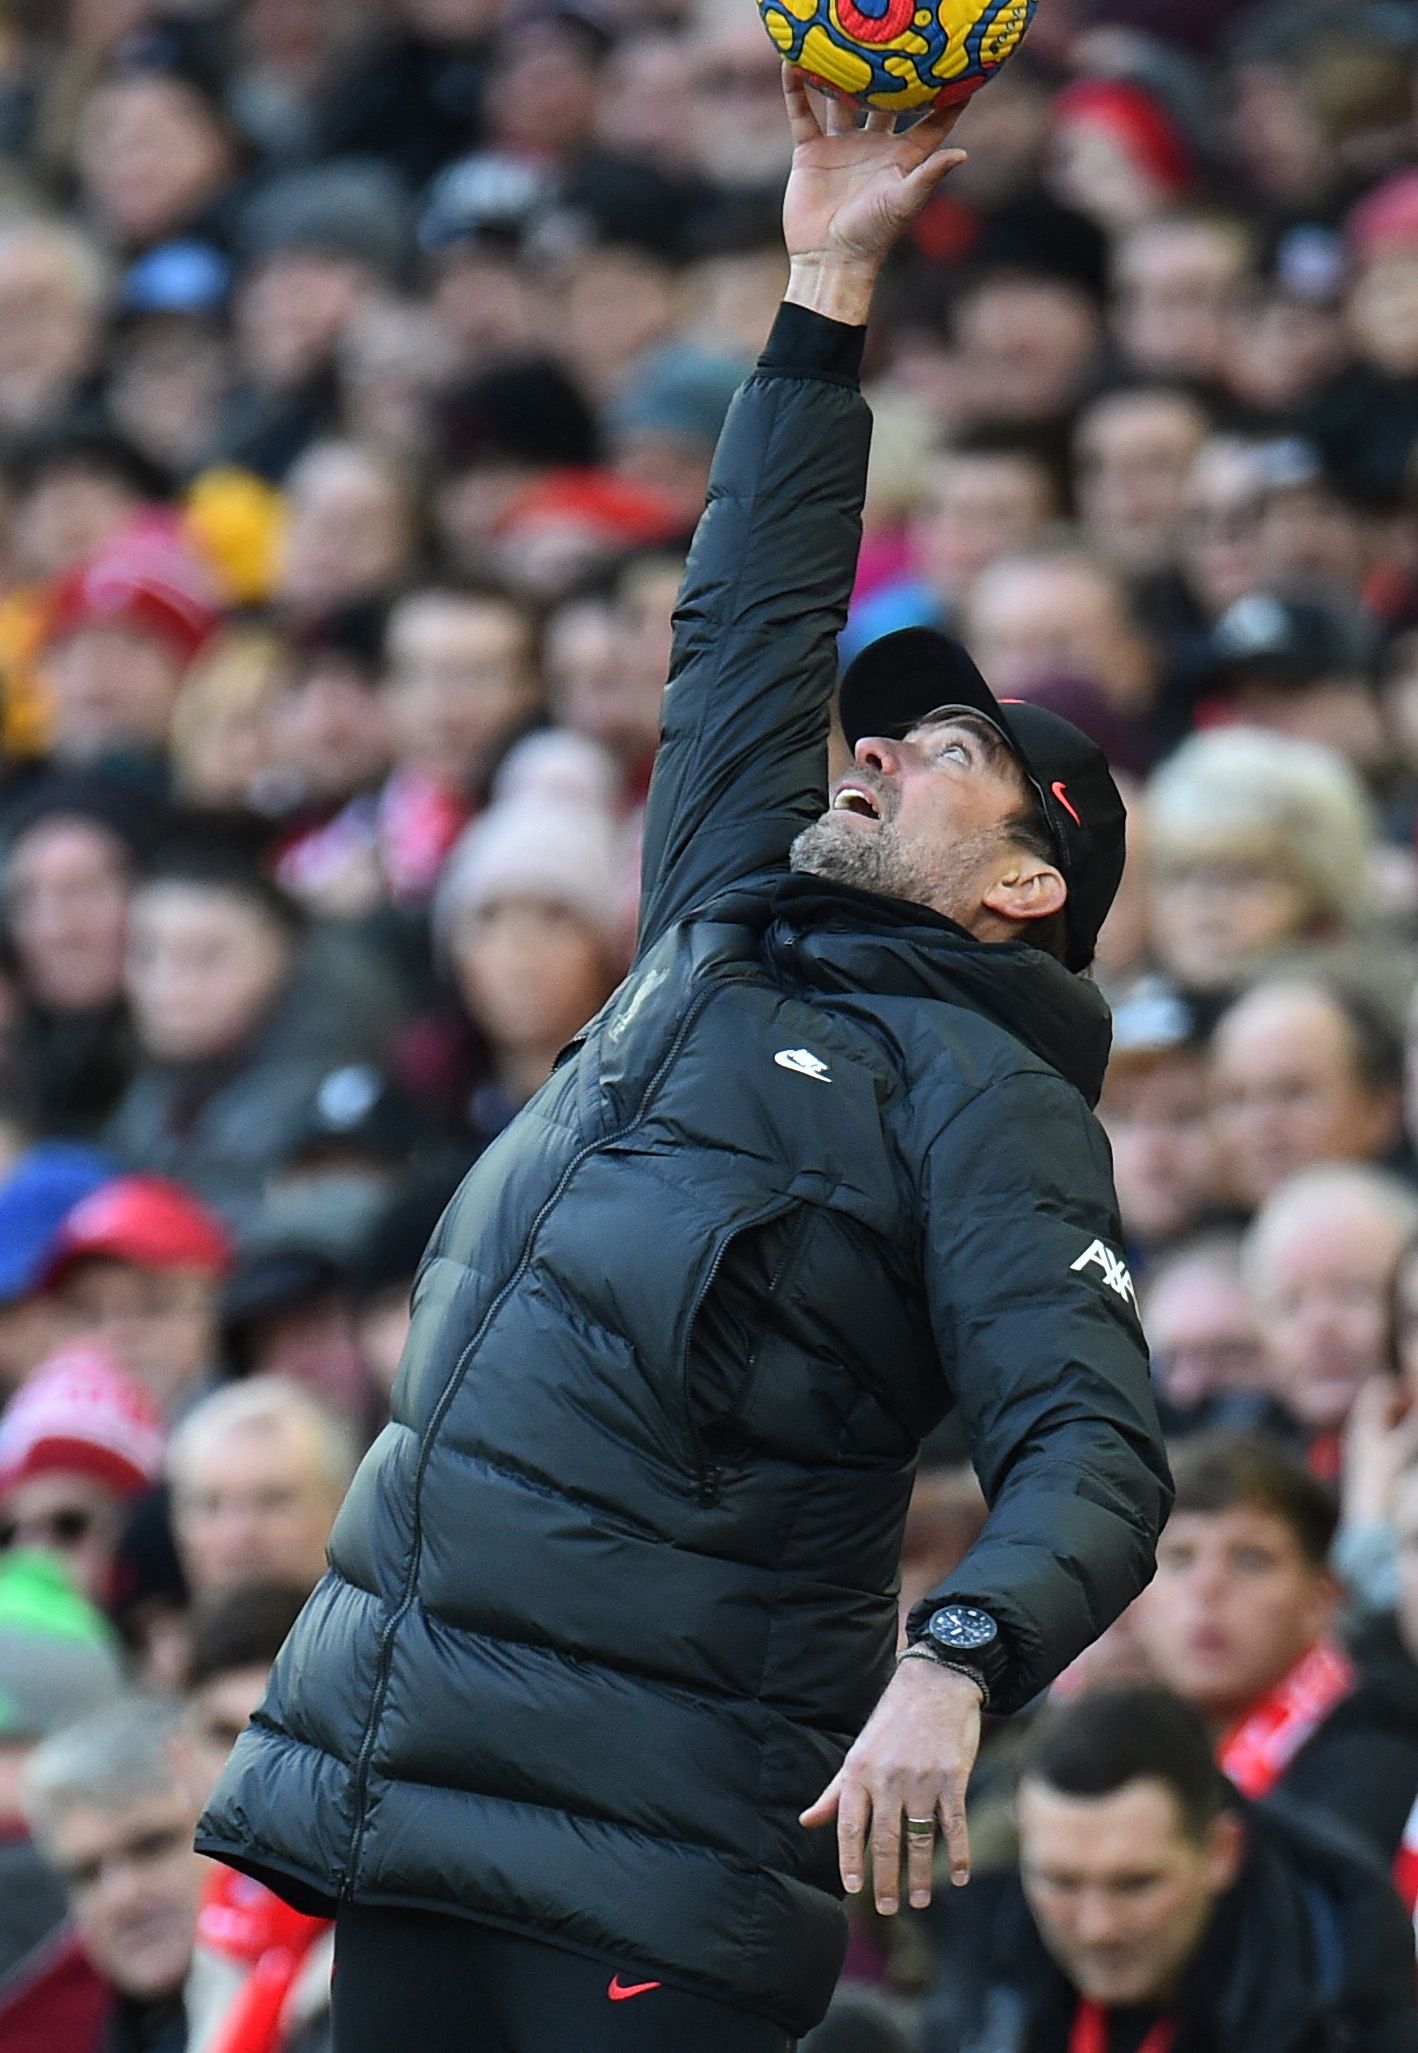 Liverpool's Klopp catches a ball.